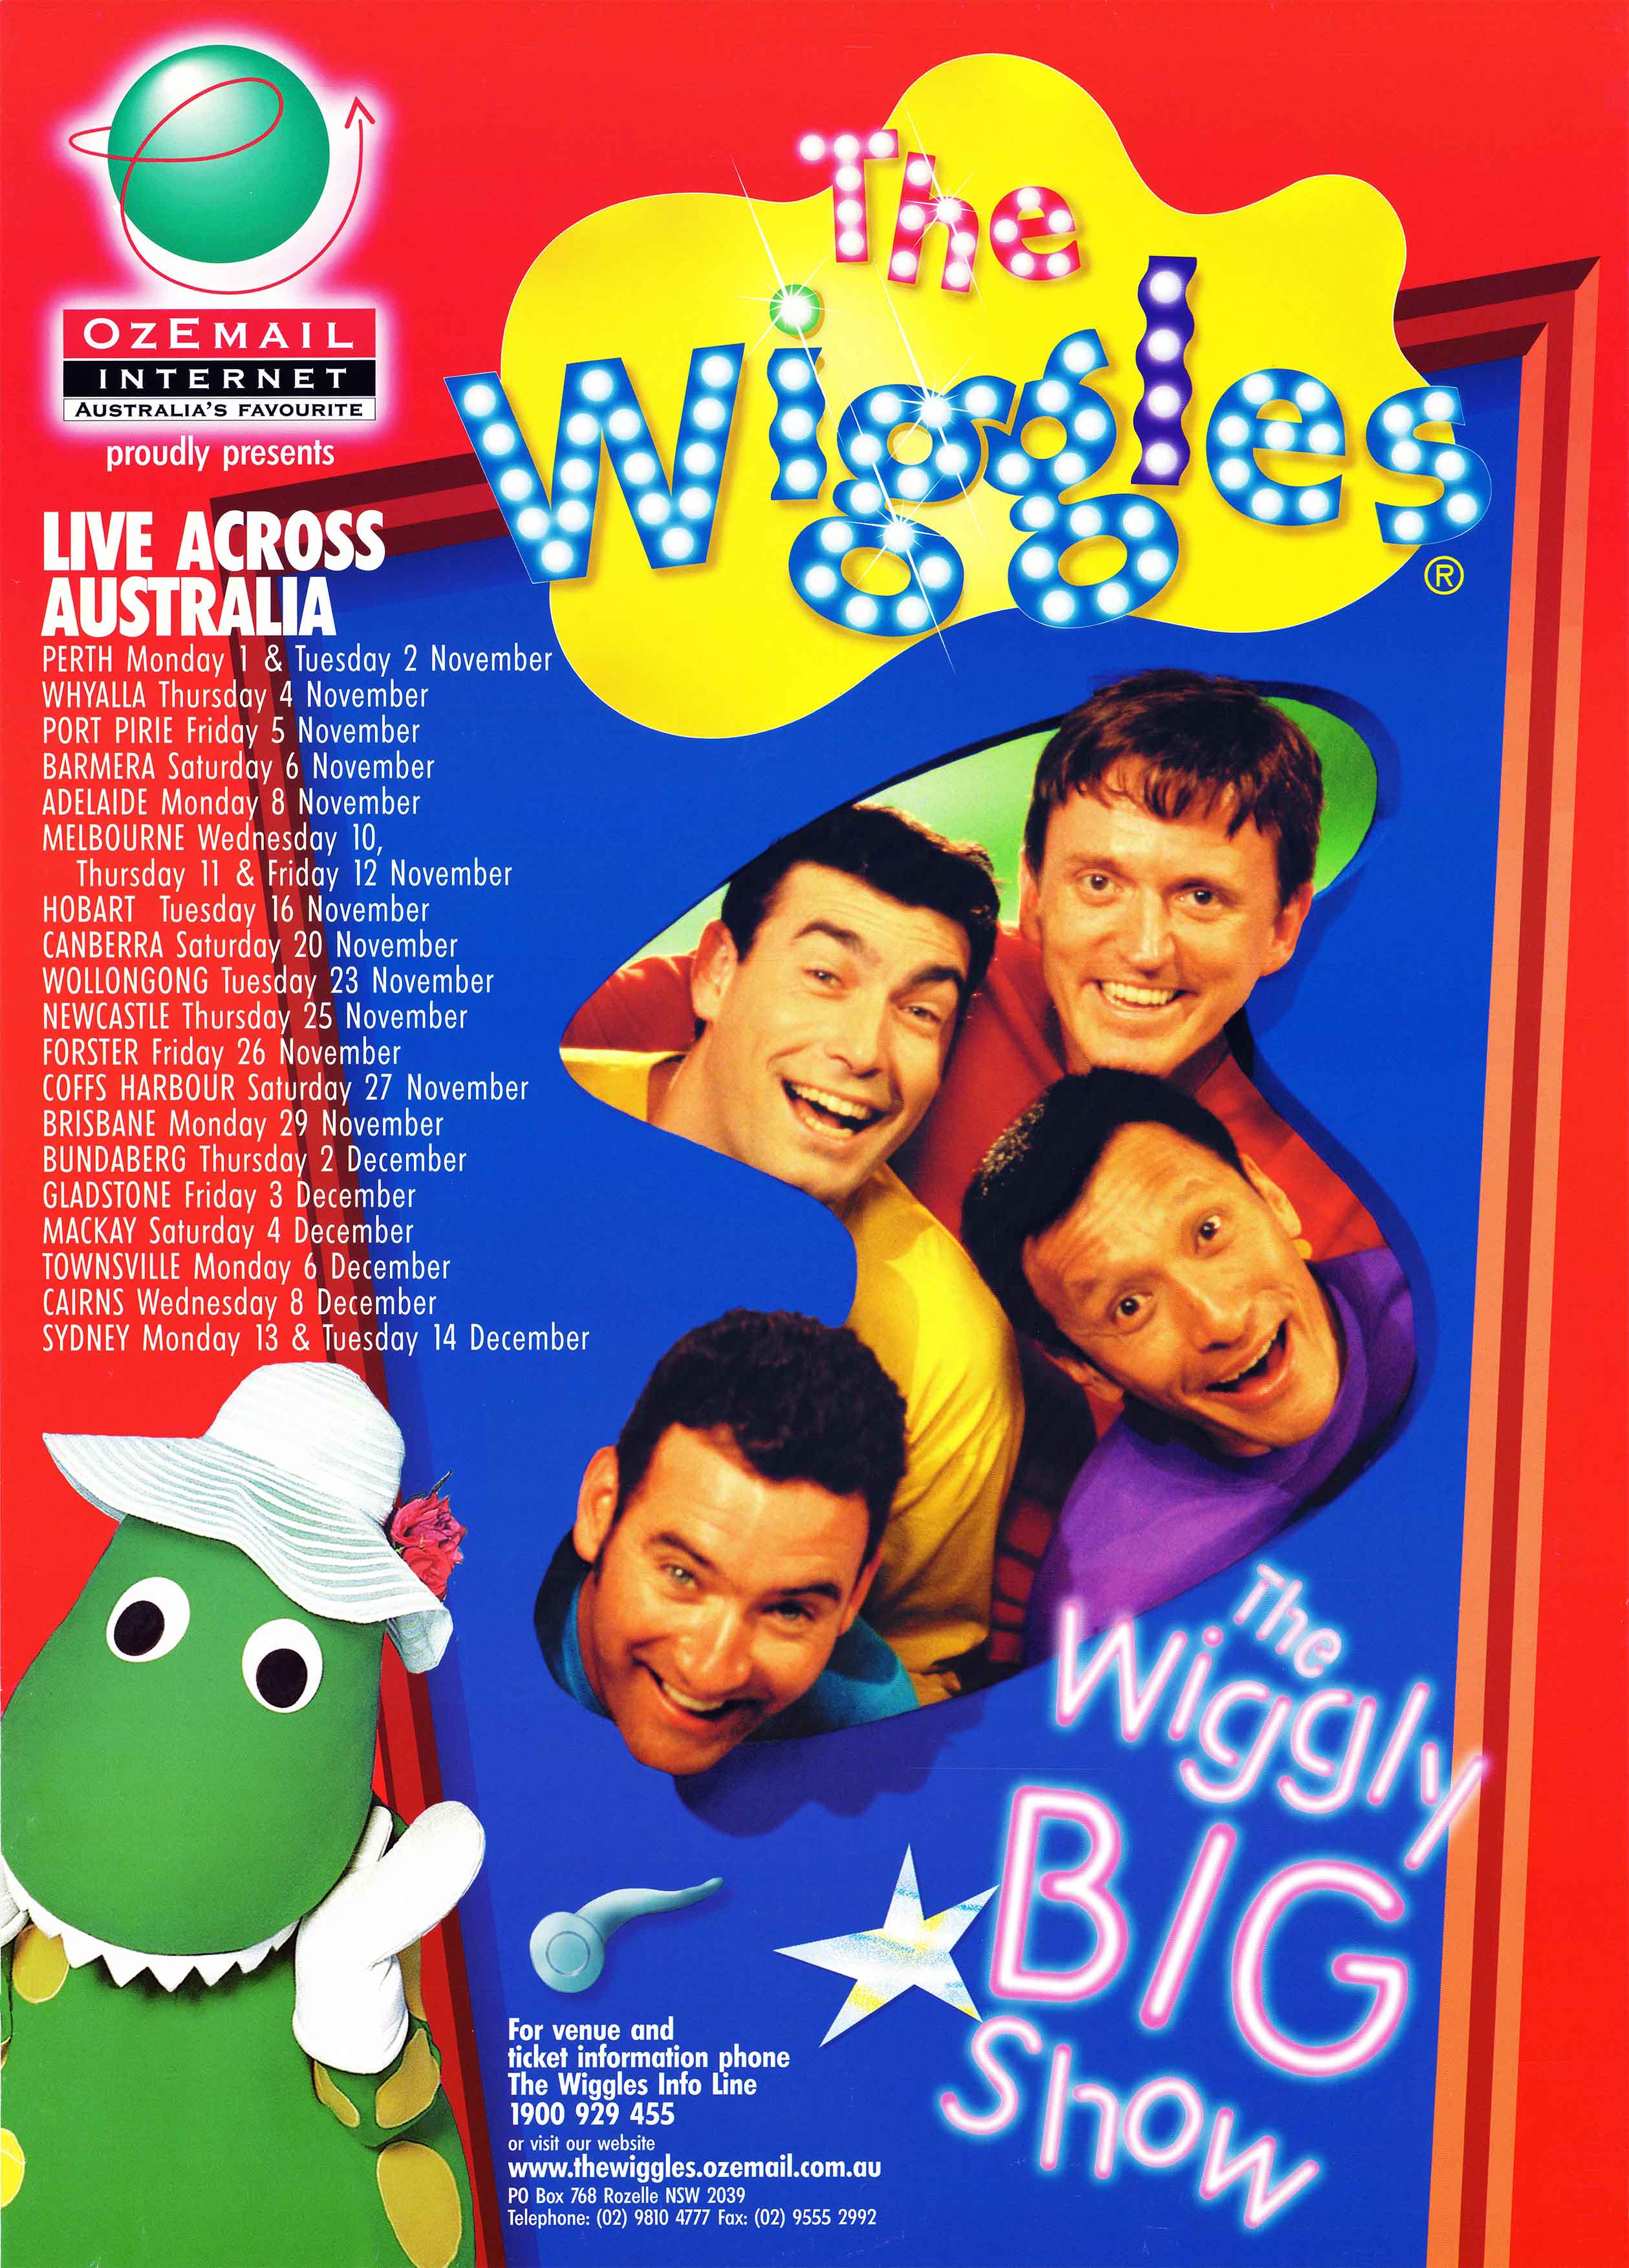 Wiggly Big Show Tour Poster (Lizzio).jpg